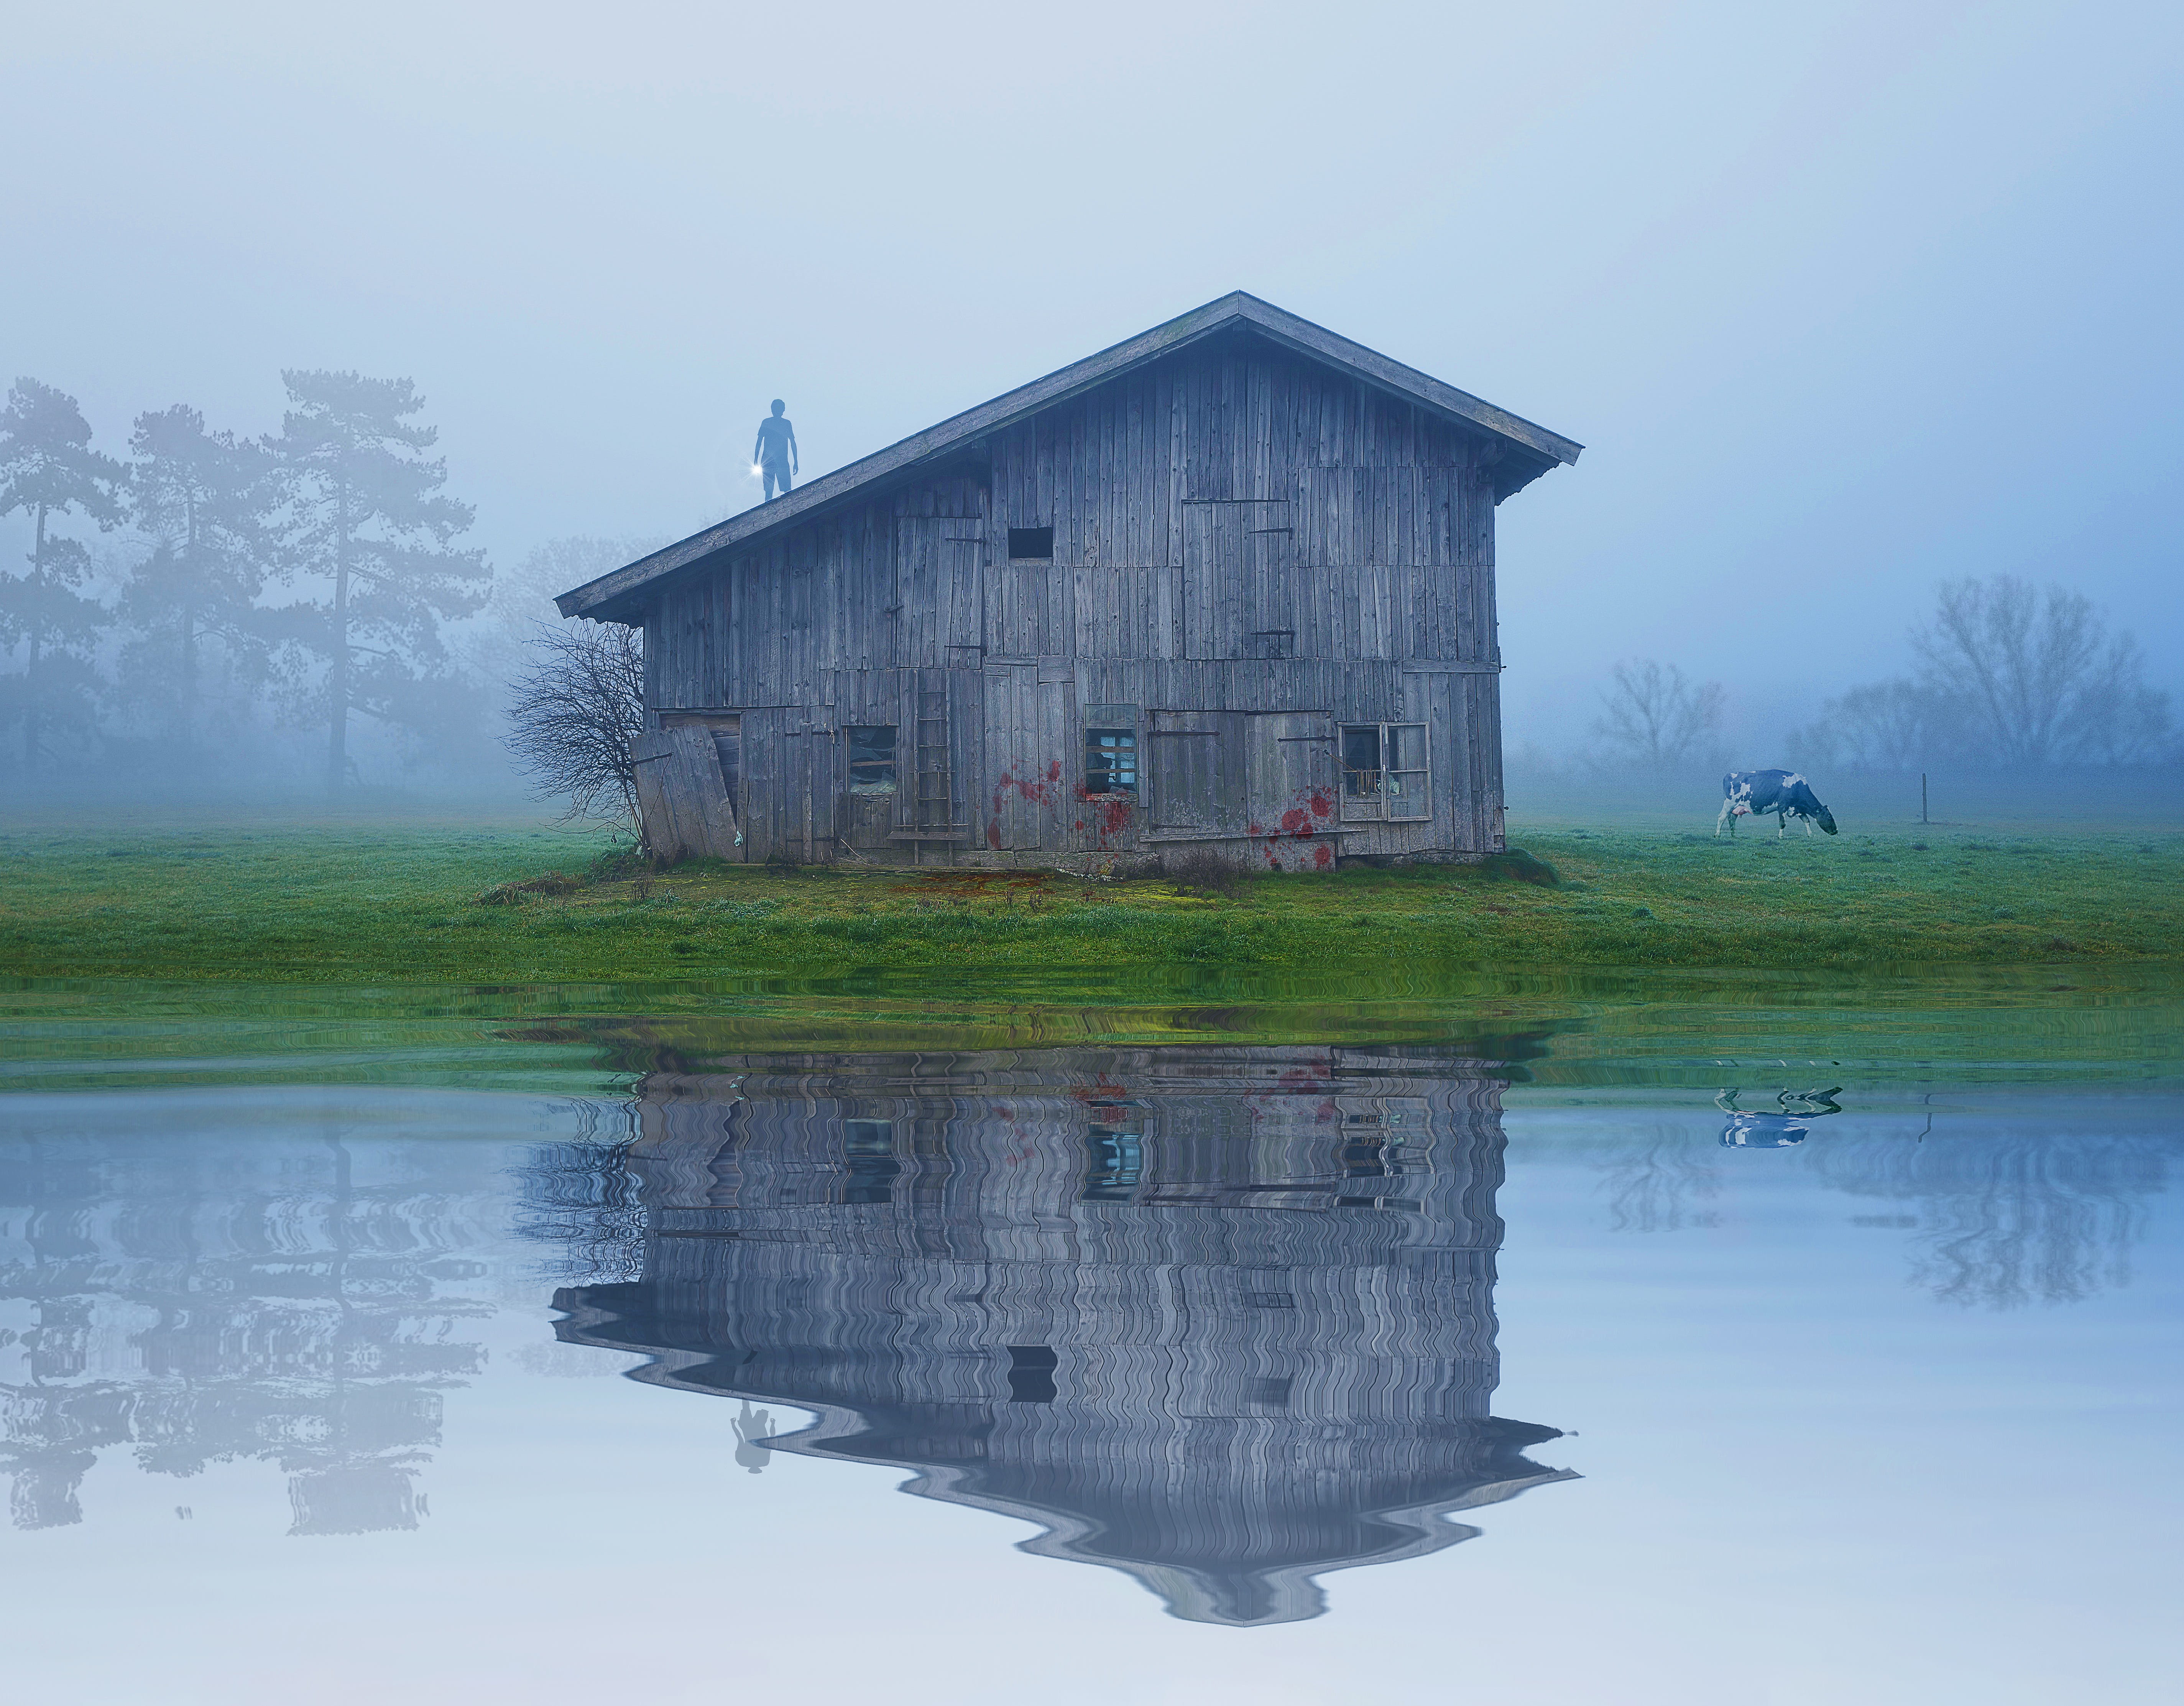 water, house, barn, outdoors, nature, lake, architecture, wood